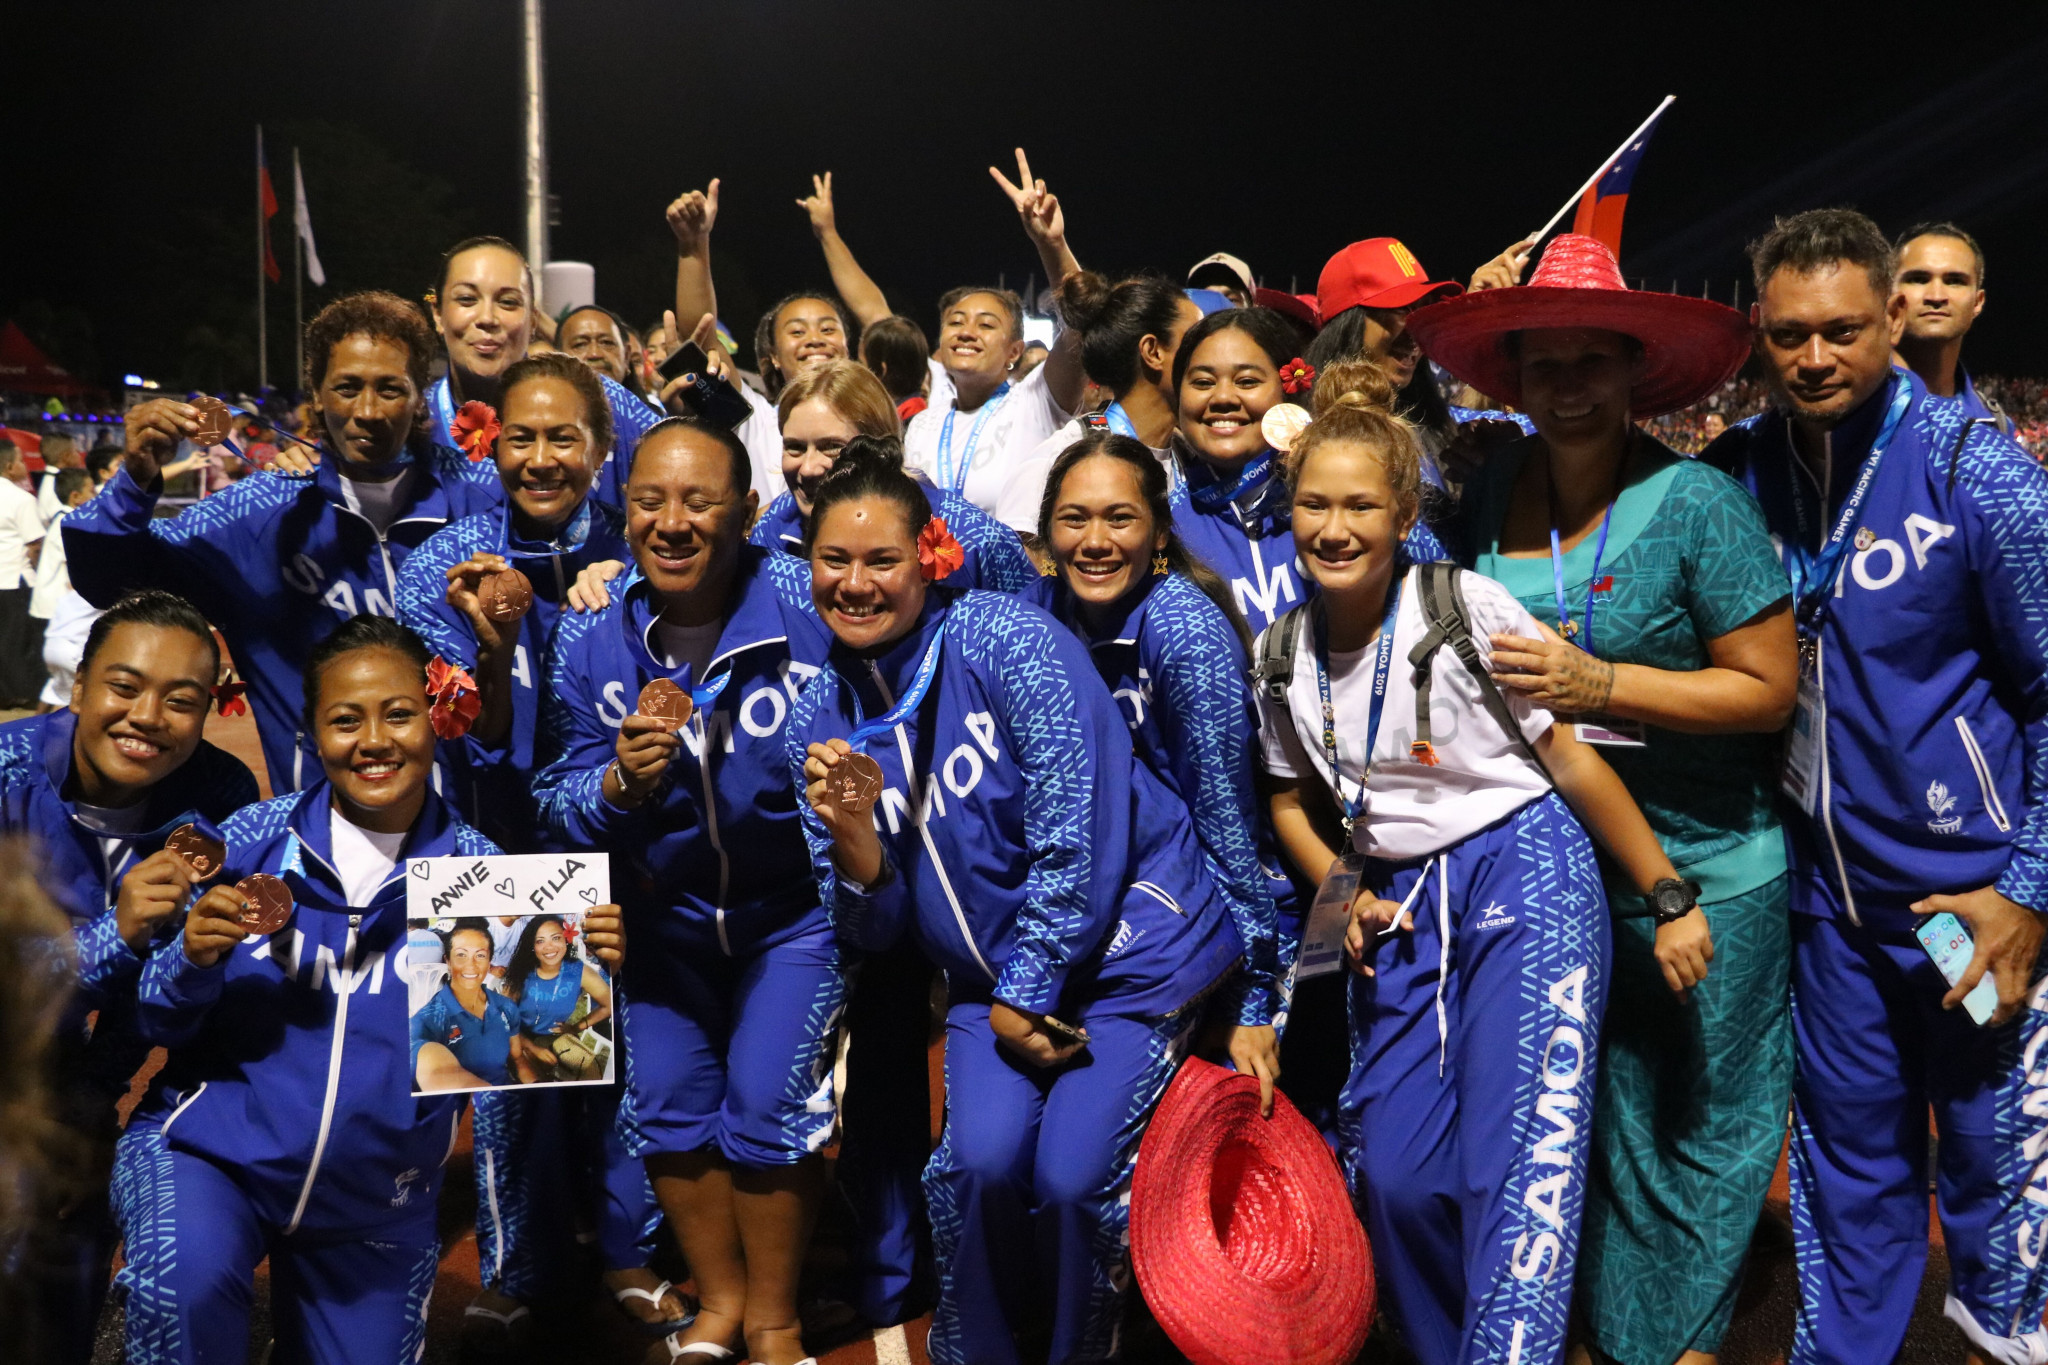 Pacific Games come to a close as Samoa Prime Minister calls for "consultations" on transgender athletes in speech